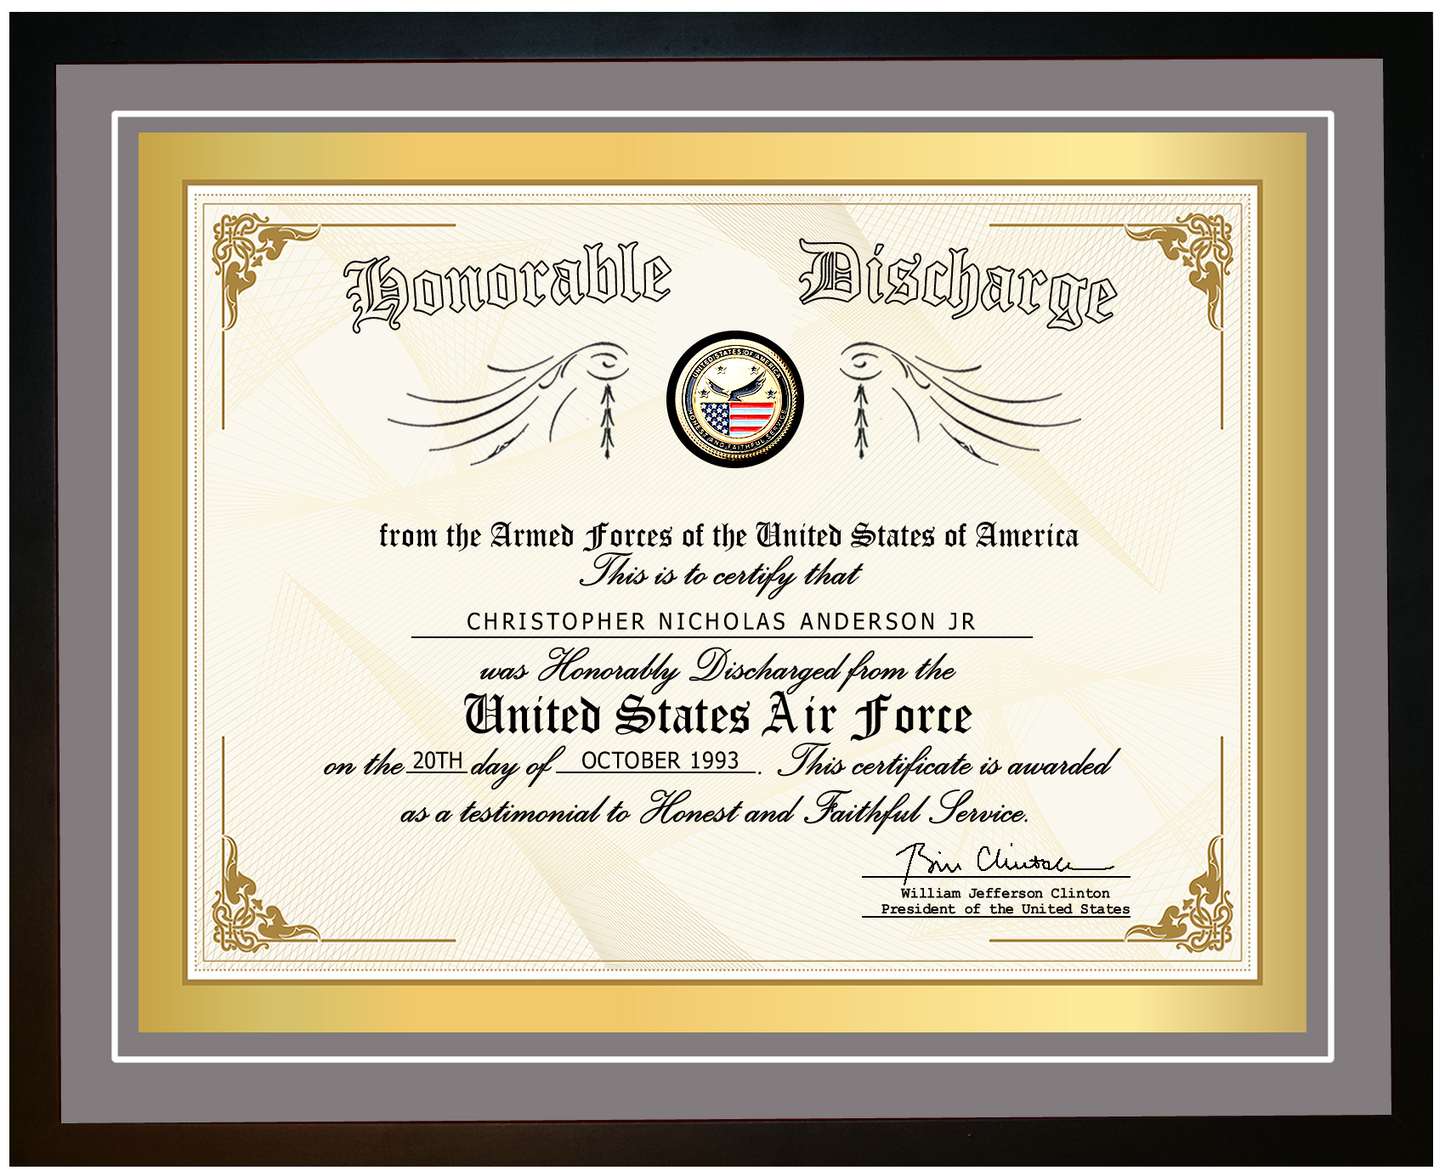 United States Air Force (USAF) Honorable Discharge Certificate